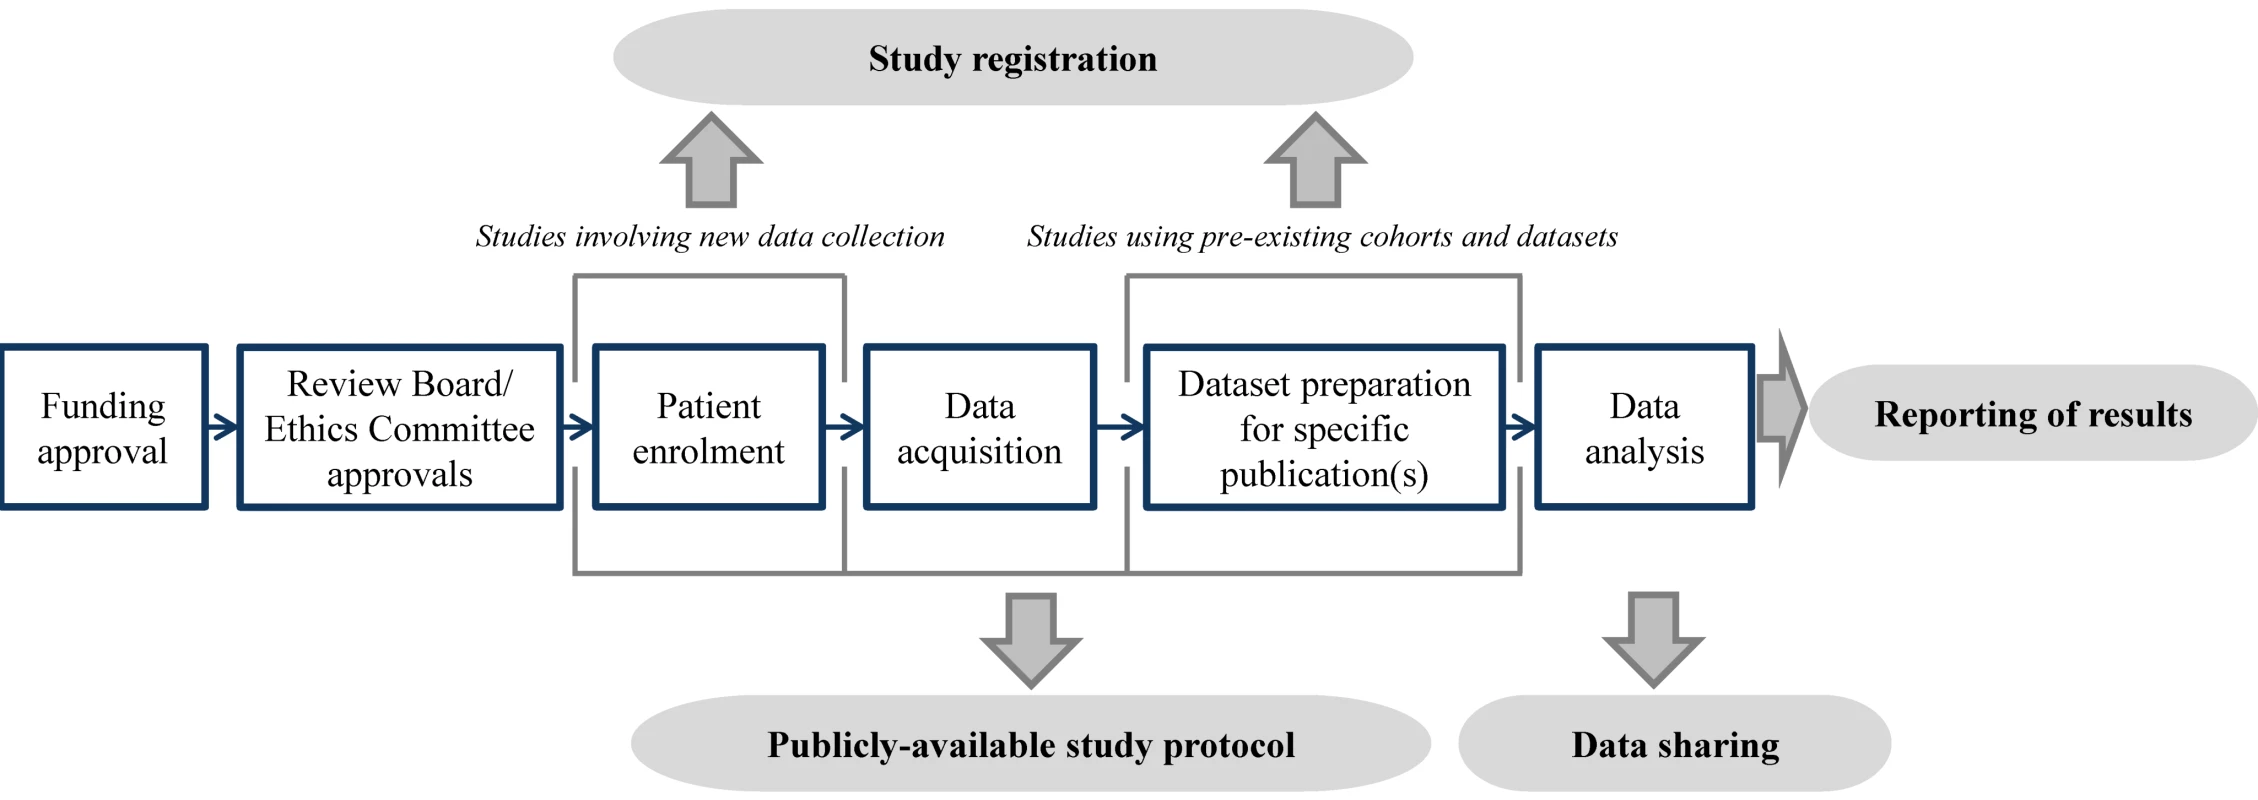 Illustration of the timing of prognosis study registration, protocol publication, data sharing, and reporting.